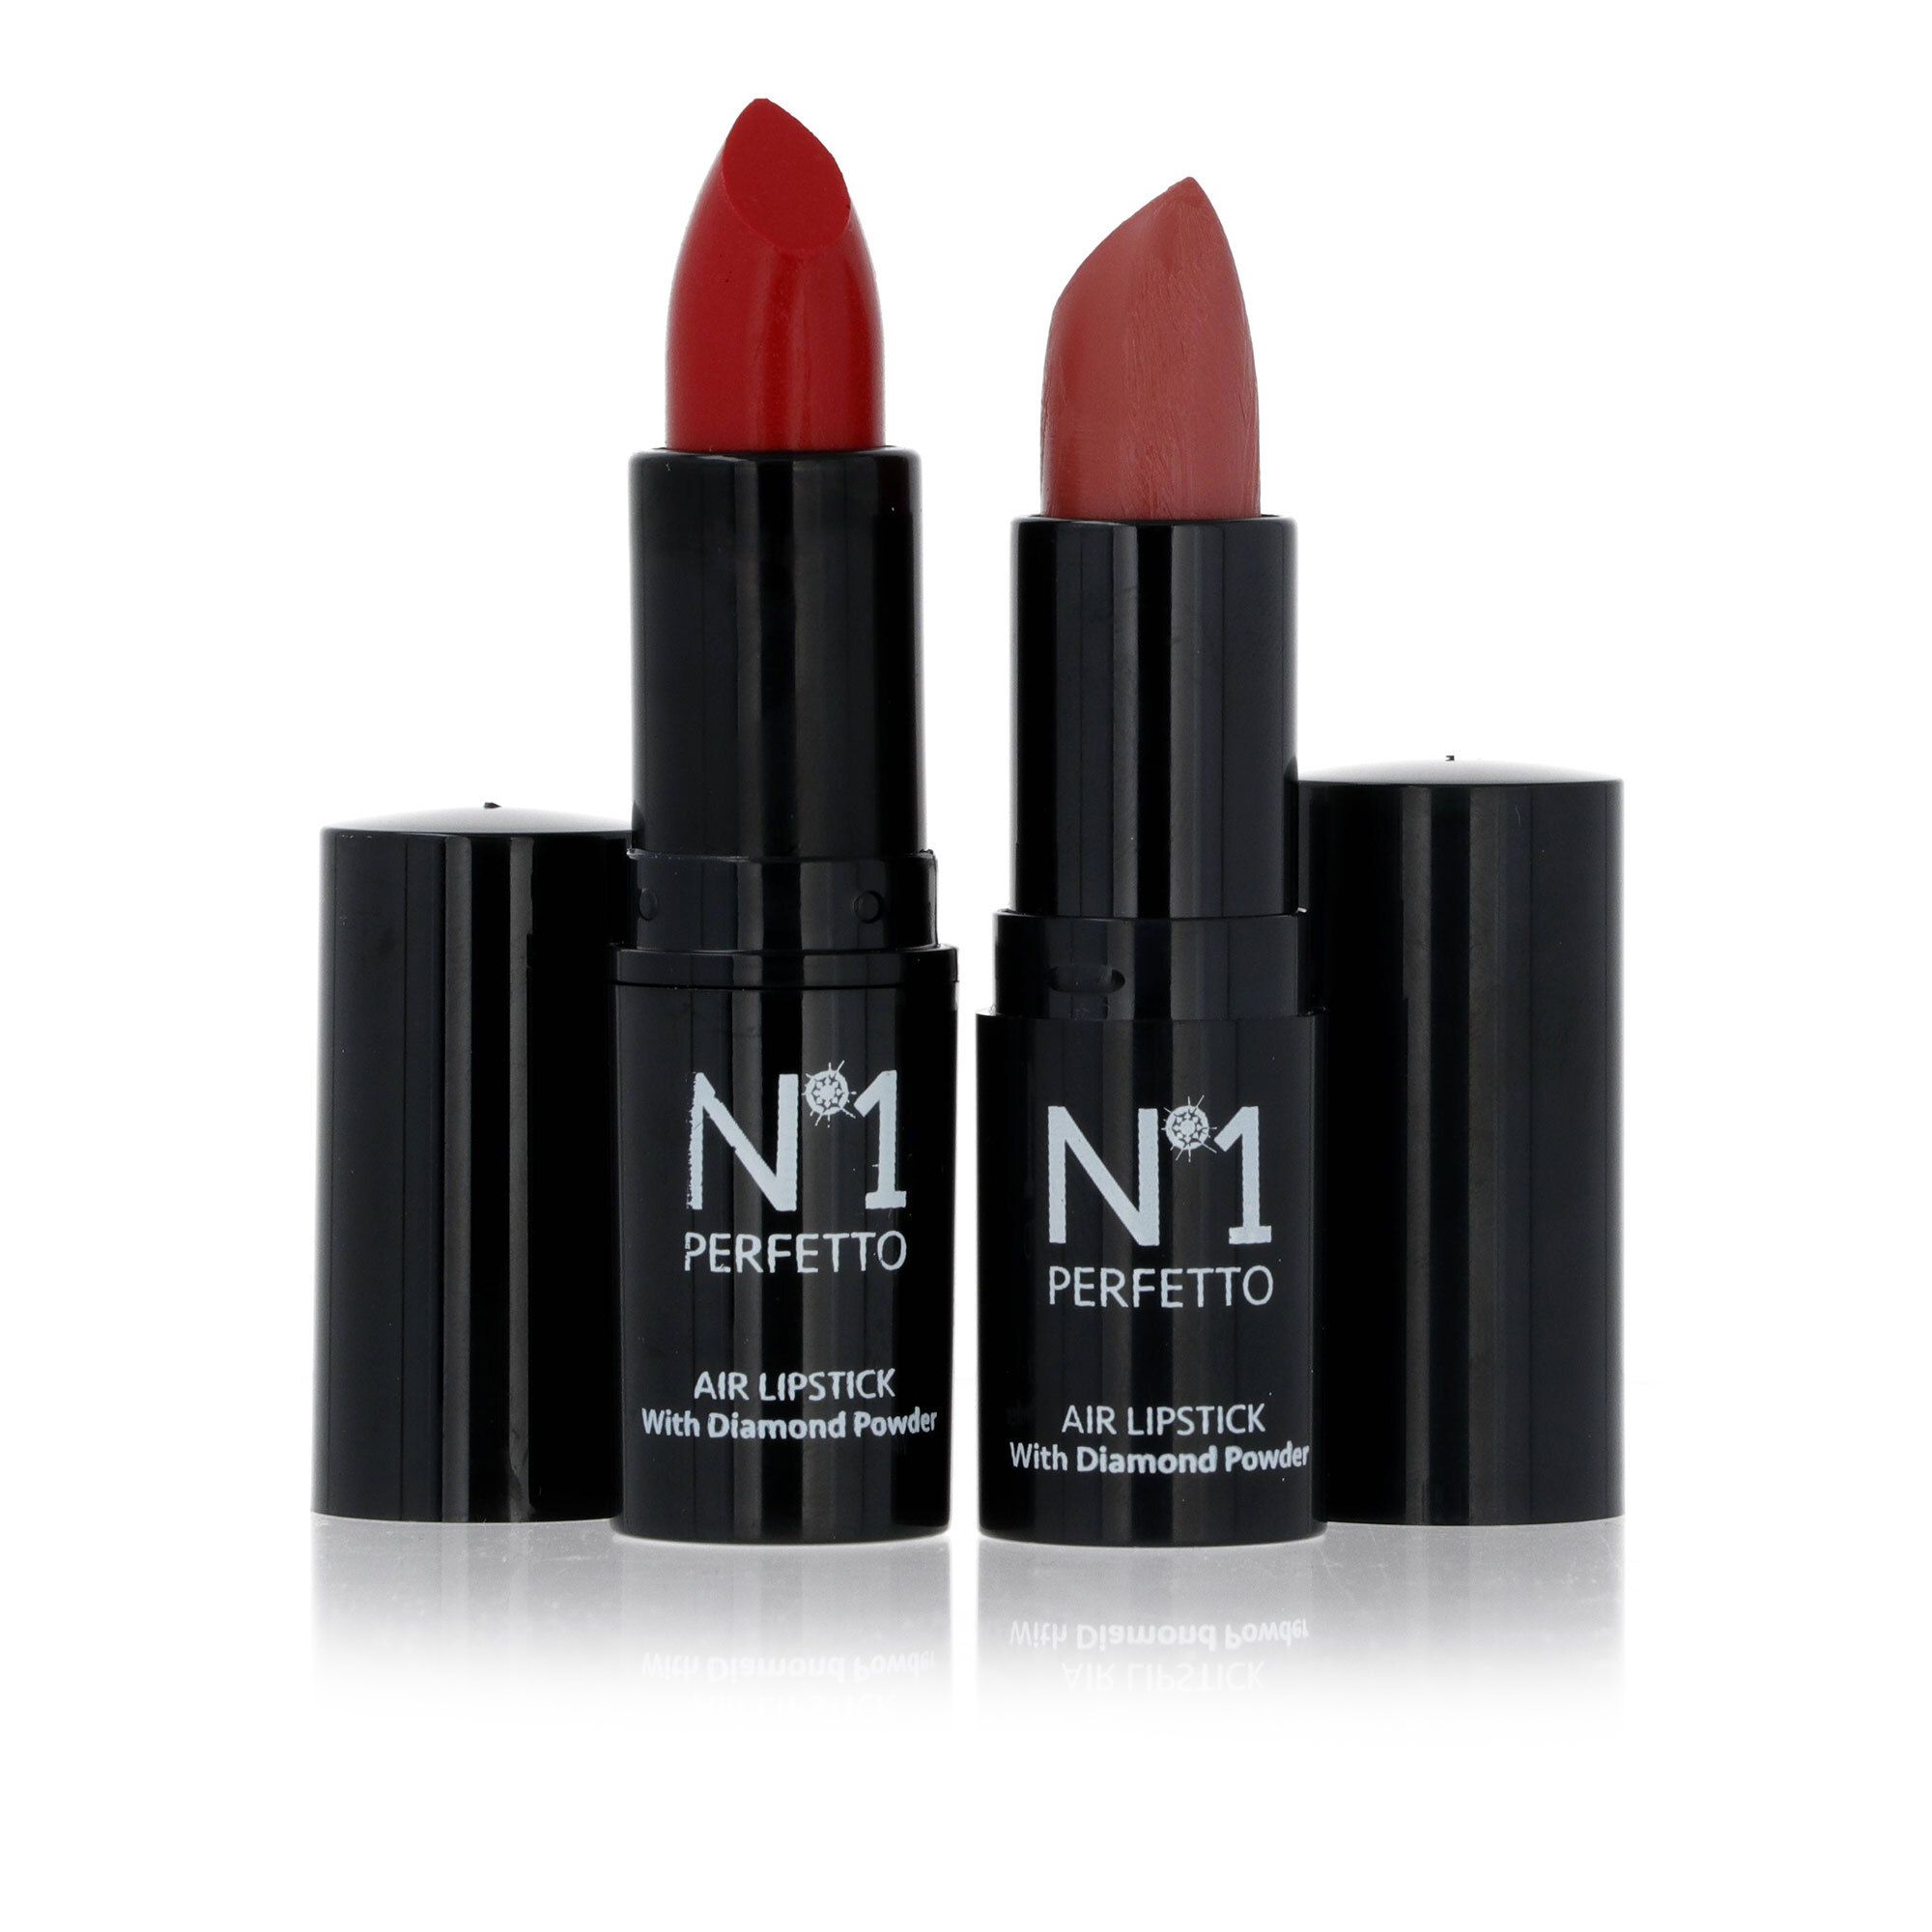 Image of 2 rossetti Glossy Specialist nuance Rosa e Rosso